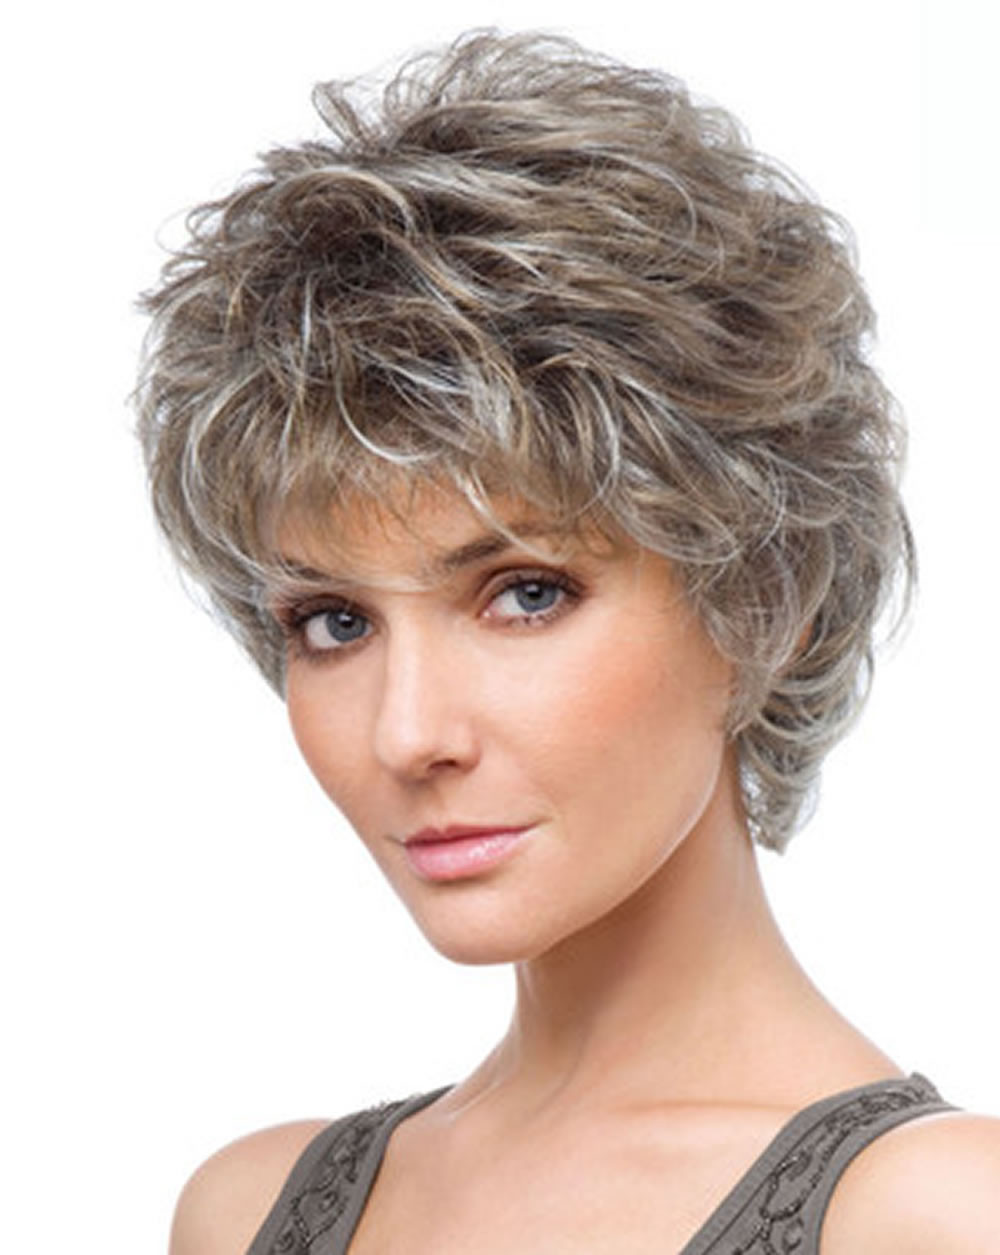 Mature Womens Hairstyles
 30 Easy Short Hairstyles for Older Women – You Should Try